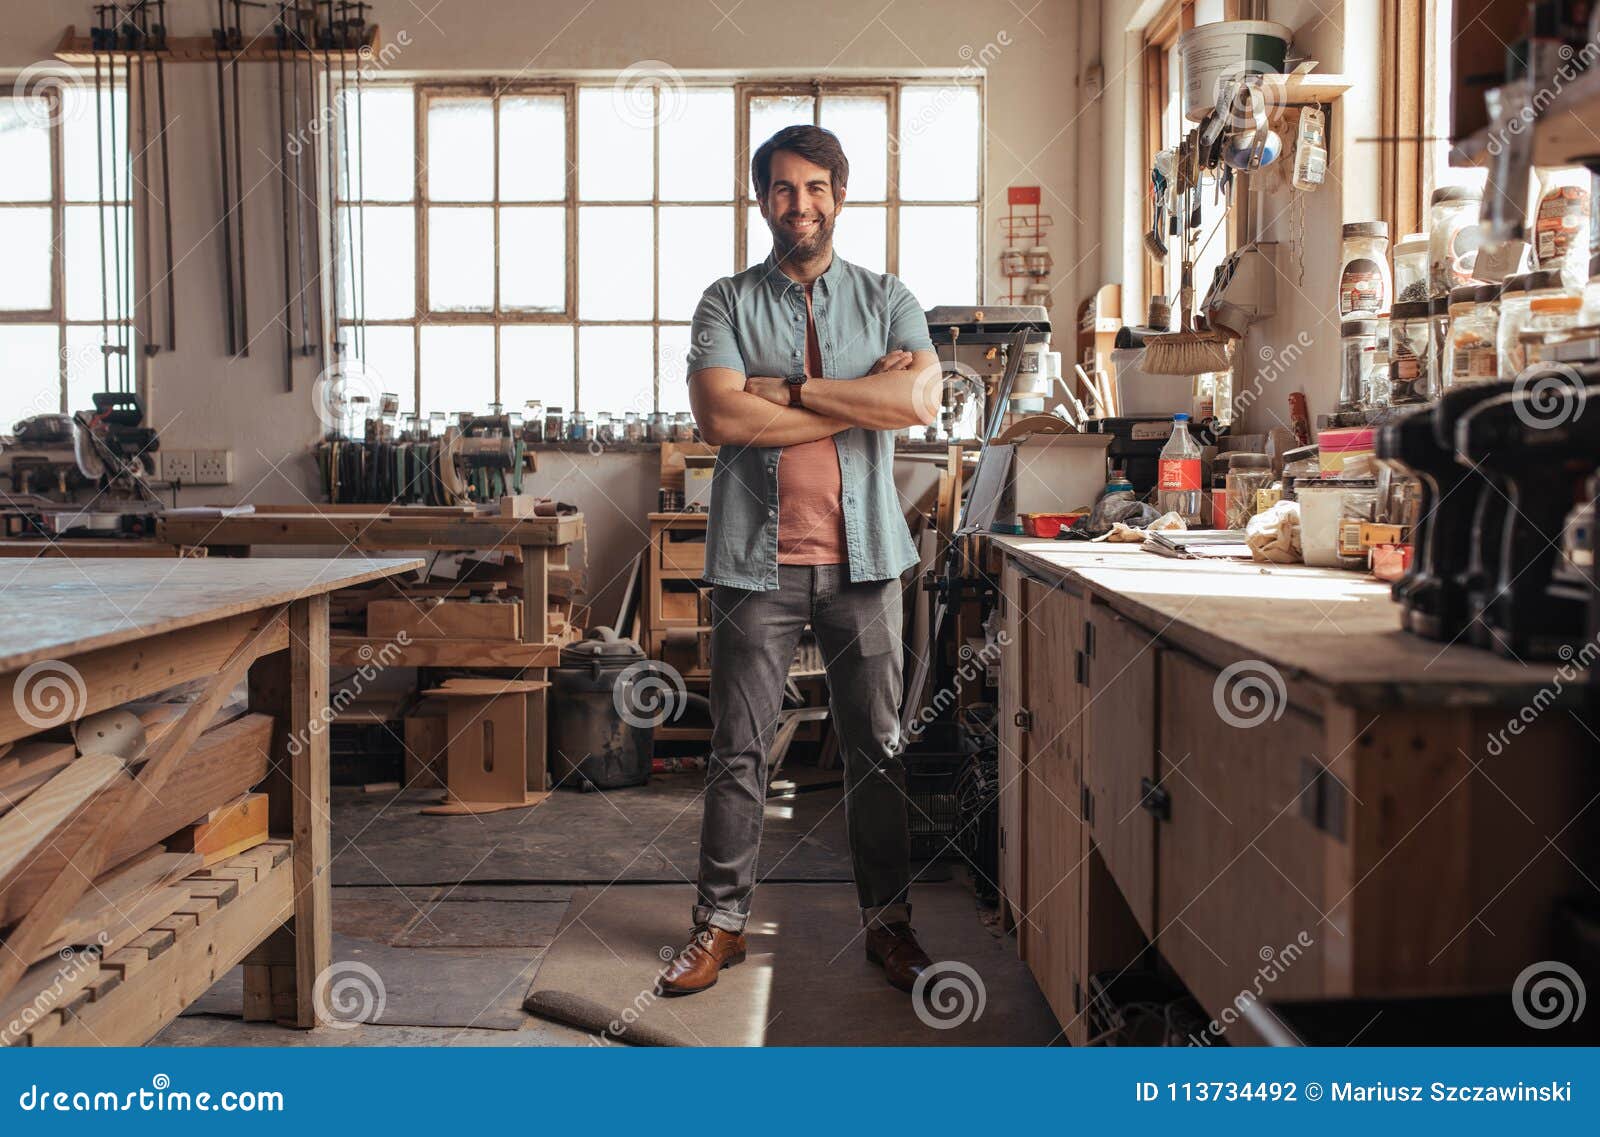 smiling young woodworker standing in his workshop full of tools